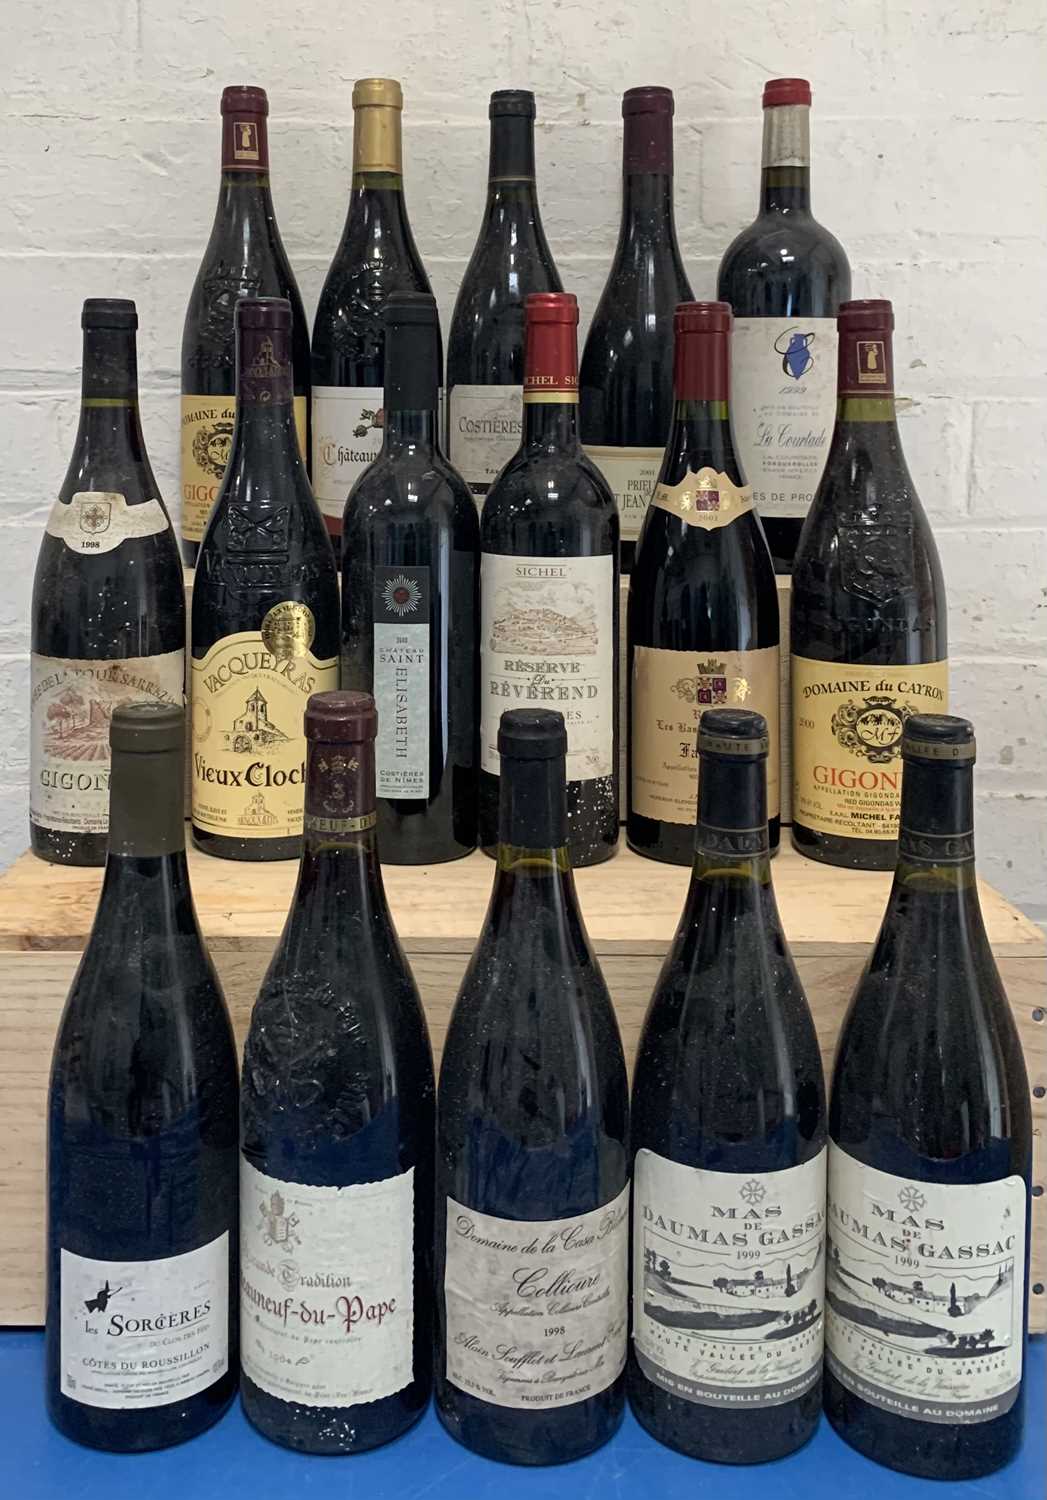 Lot 109 - 16 Bottles Mixed Lot of Fine Reds from Southern Rhone, Provence, Languedoc and Collioure